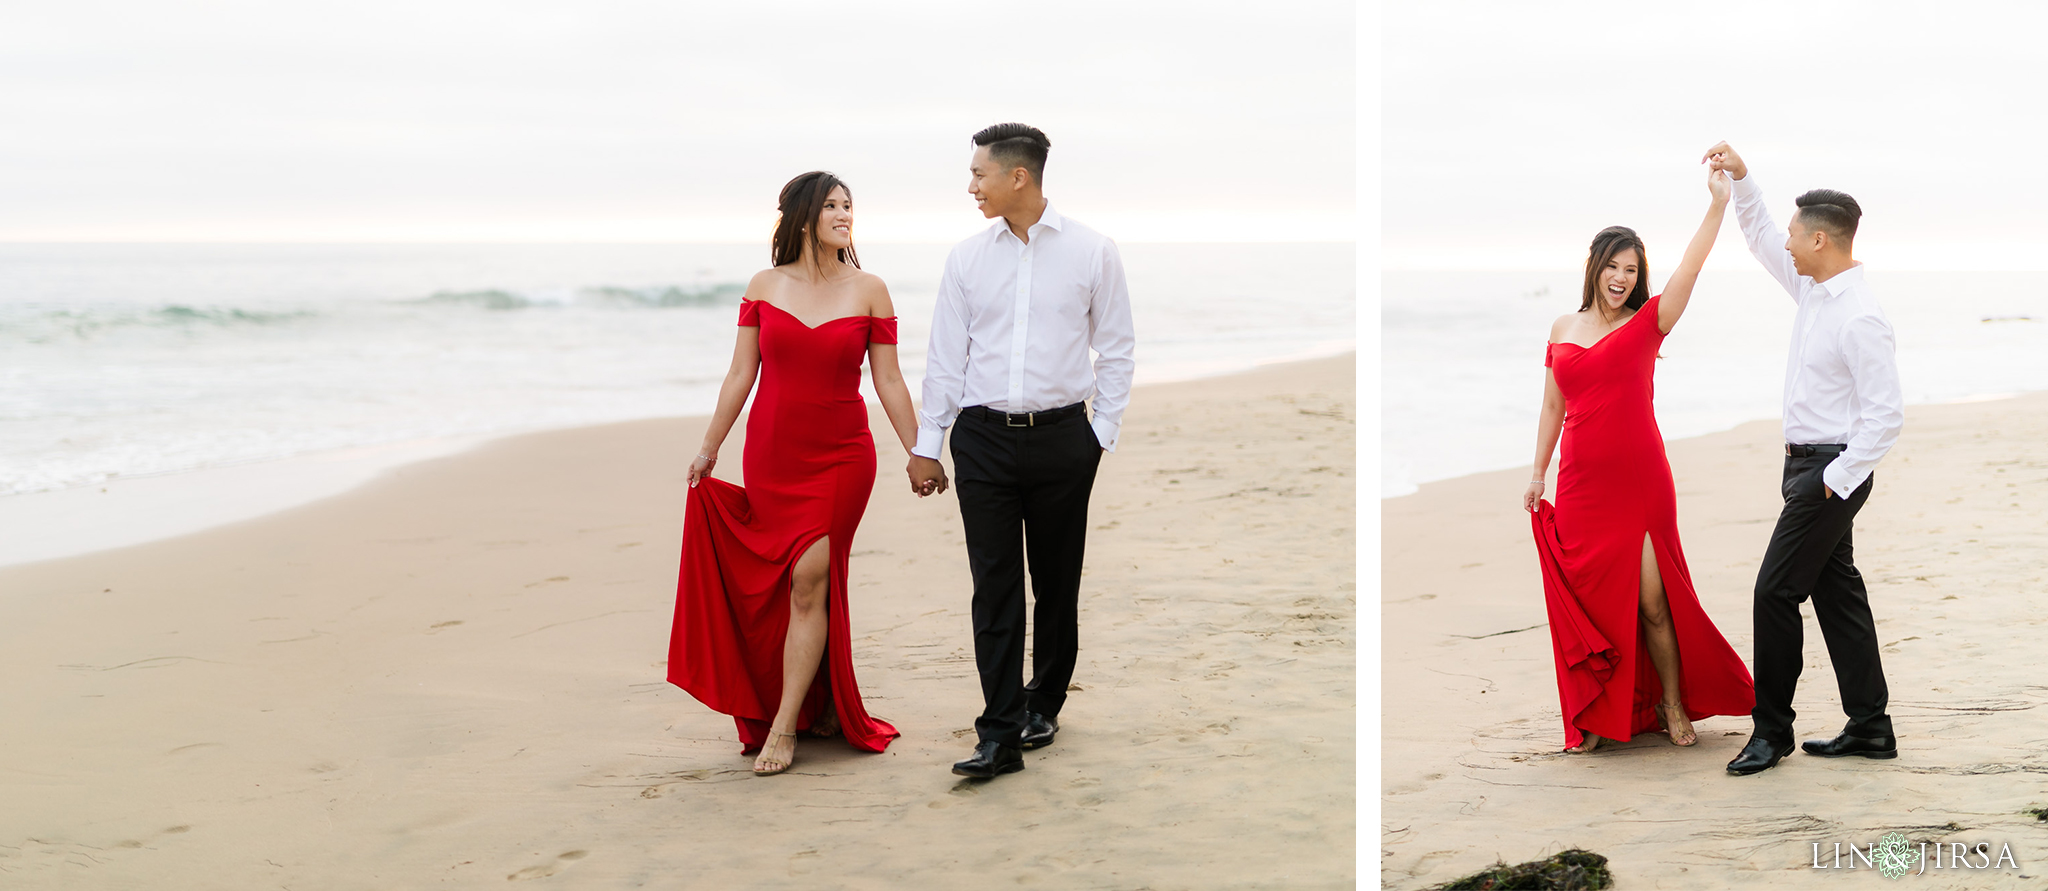 82 Crystal Cove Newport Beach Engagement Photography